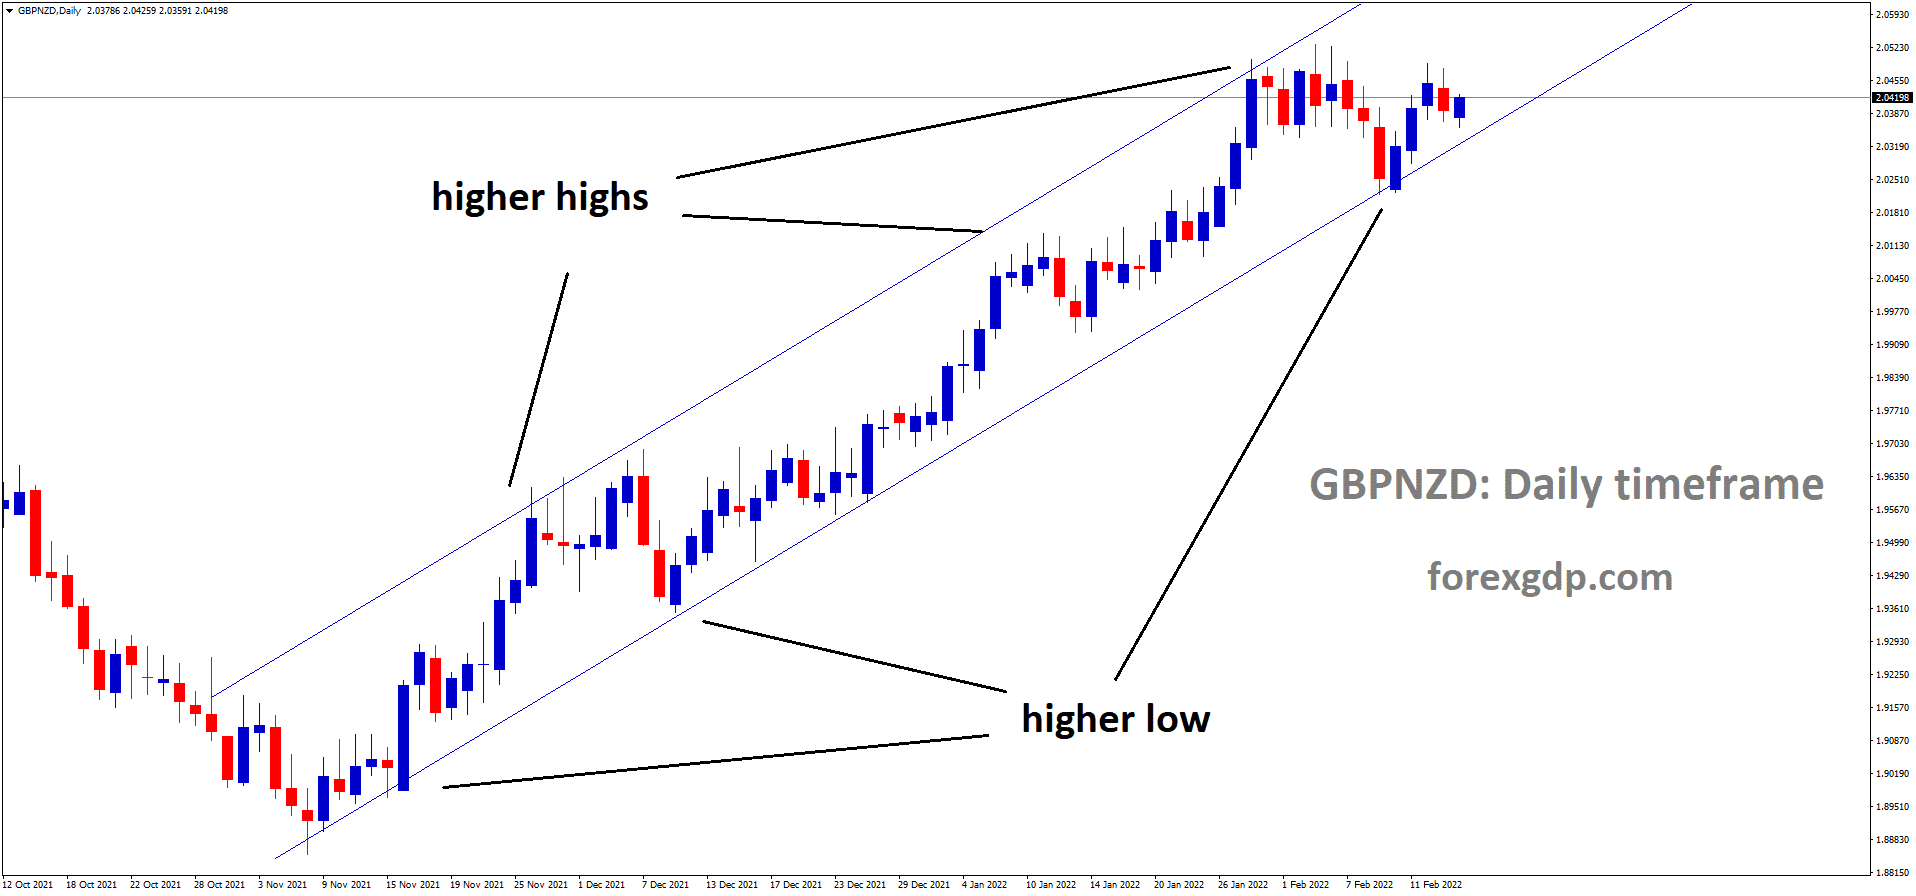 GBPNZD is moving in an Ascending channel and the market has rebounded from the higher low area of the channel